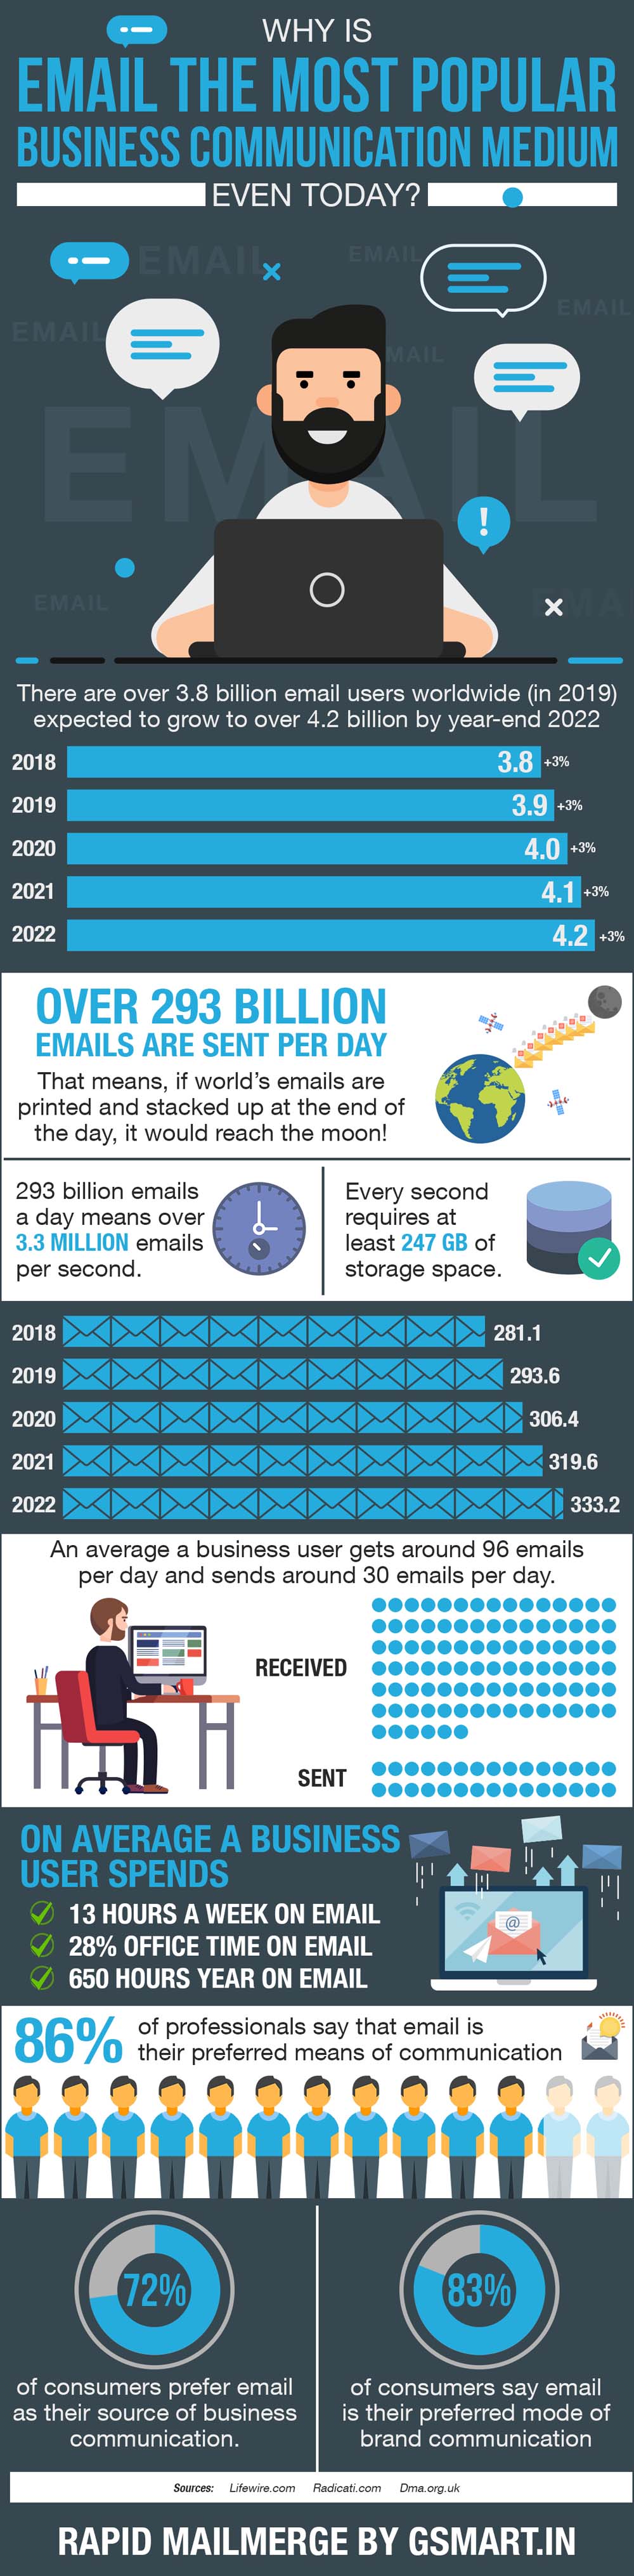 Why is Email the Most Common Business Communication Medium?